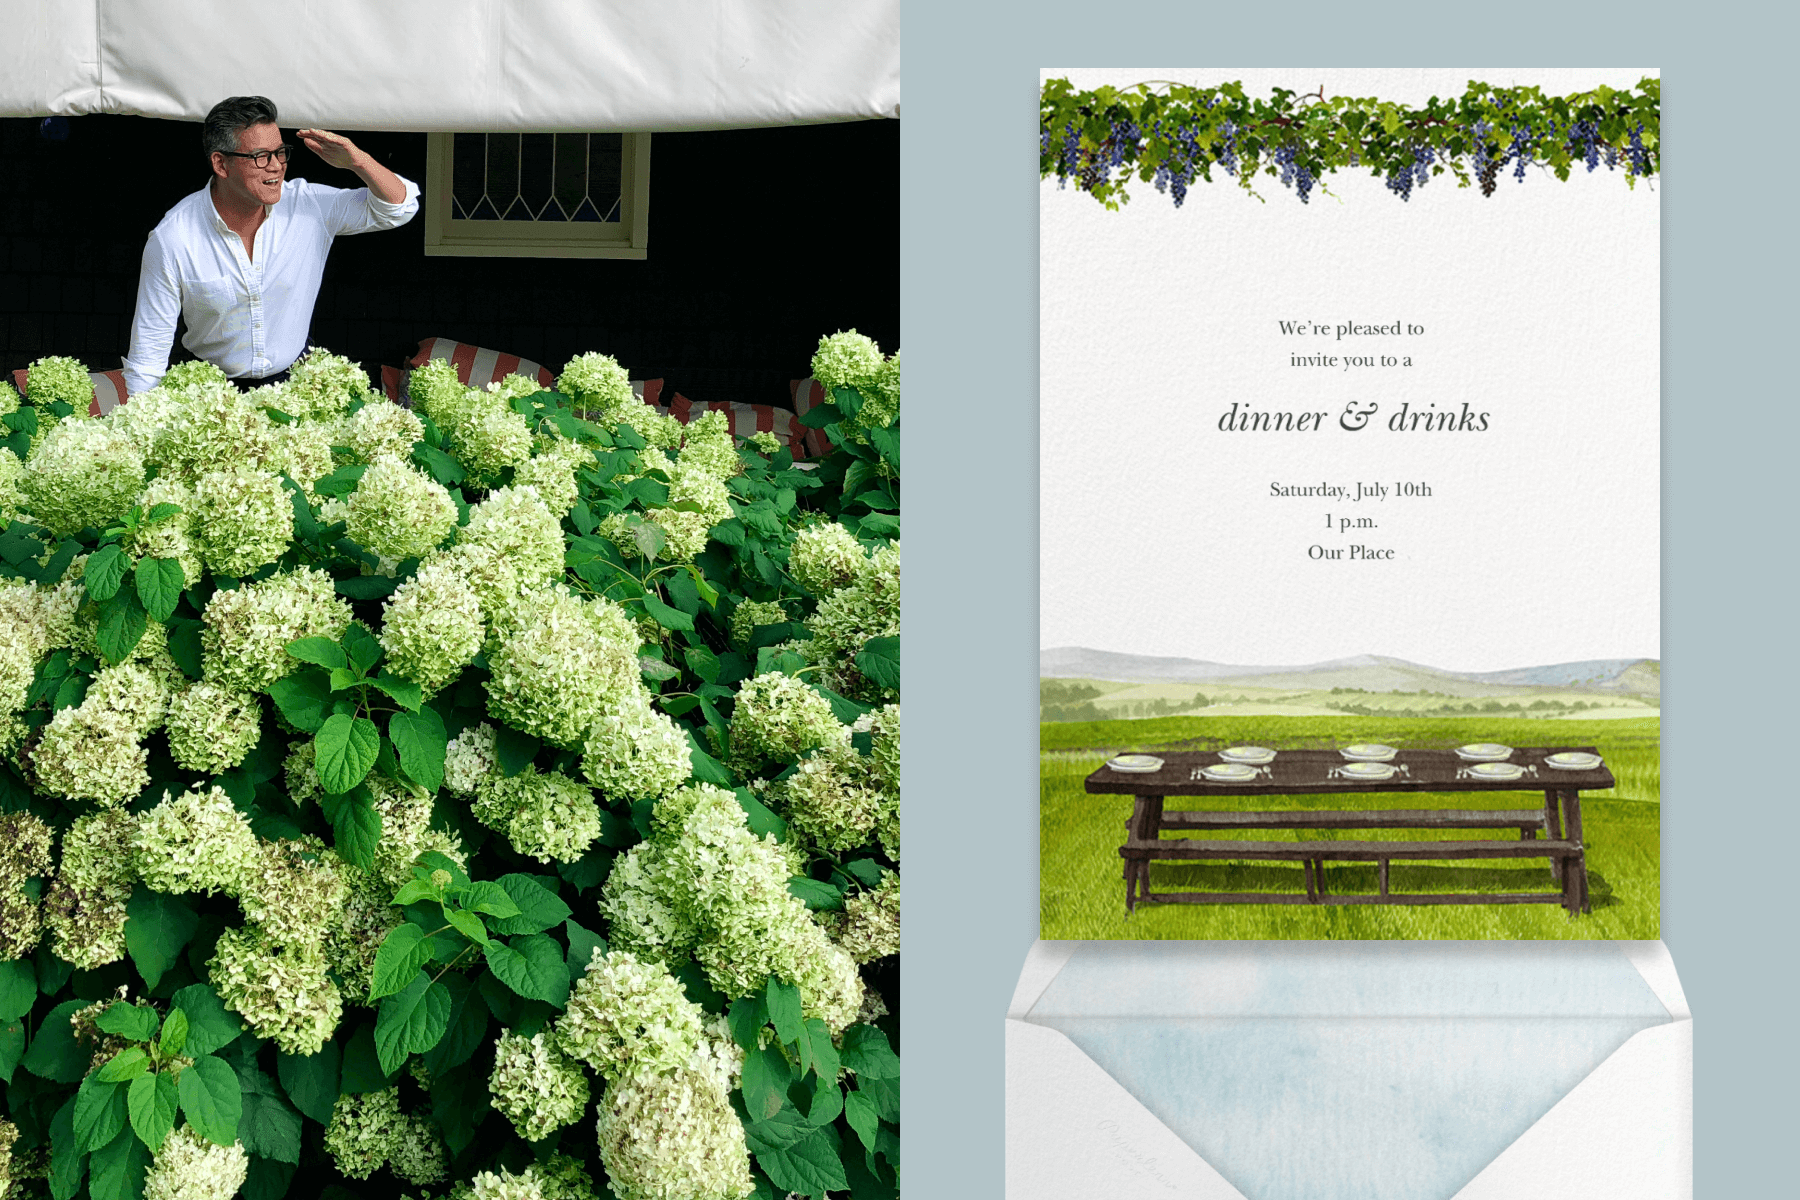 Left: Peter Som with a big hydrangea bush; Right: A dinner invitation featuring a picnic table and grape vines.